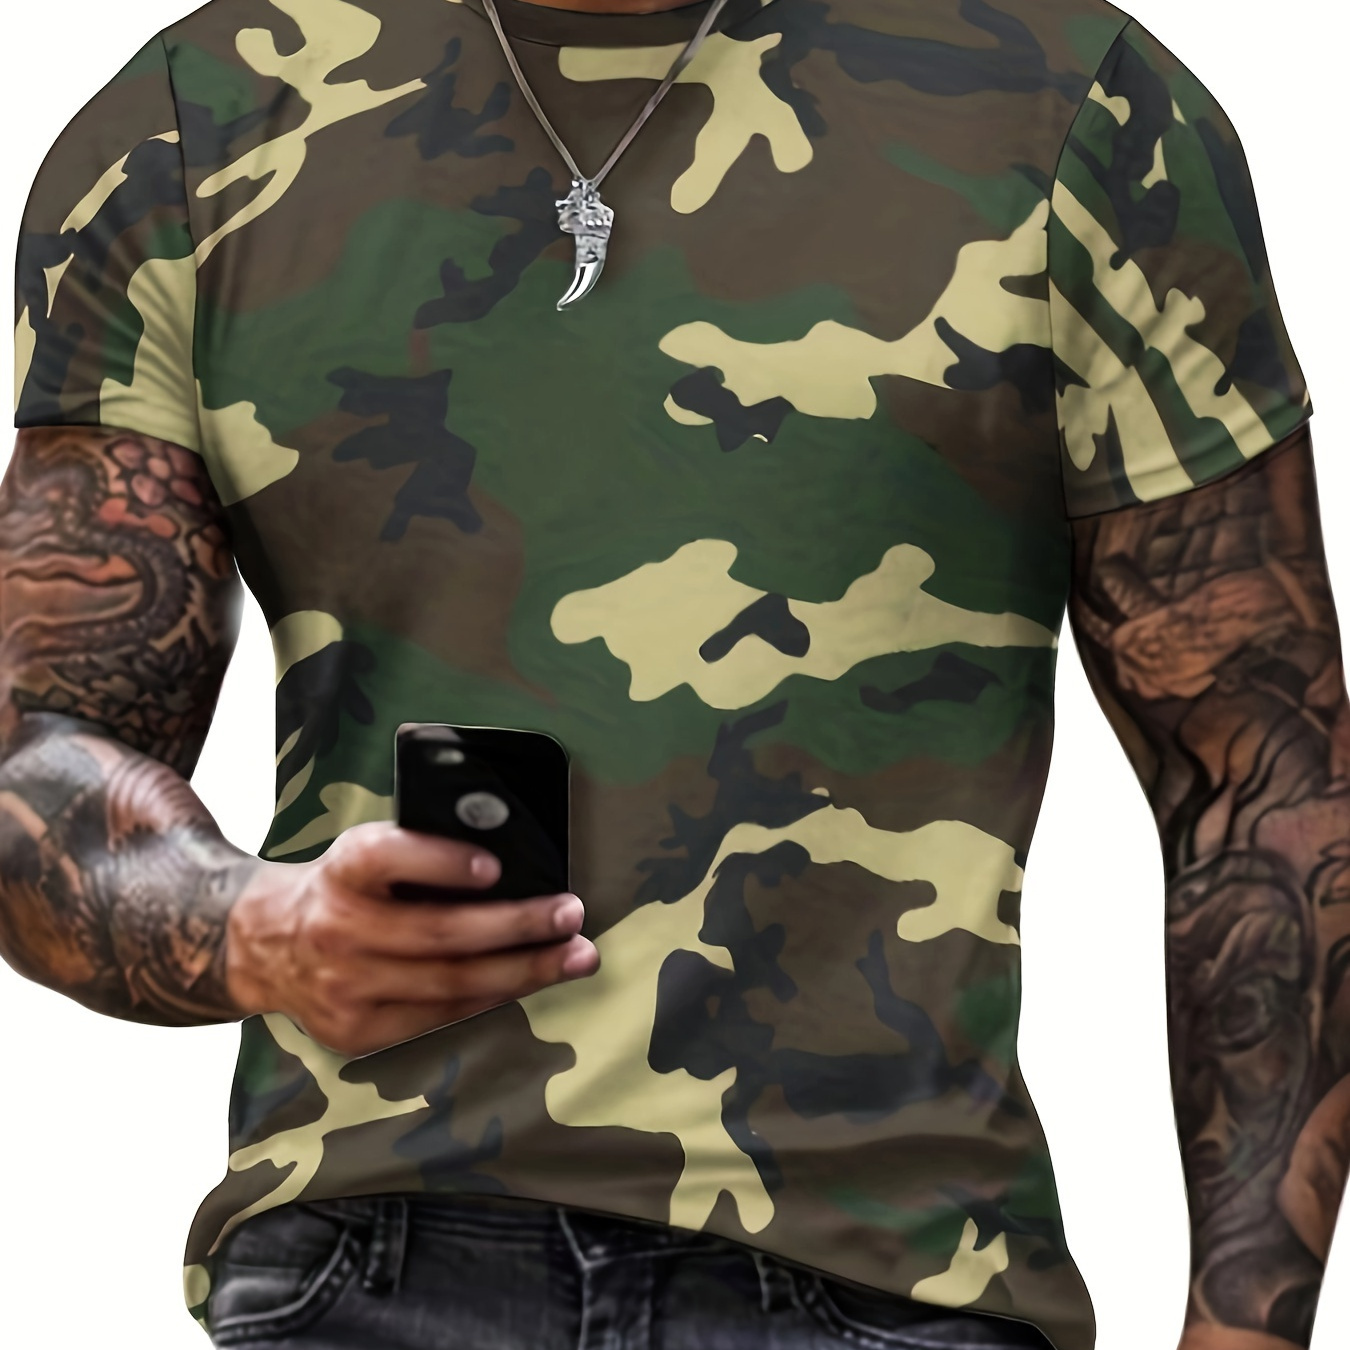 

Green Camo Pattern Design Crew Neck Short Sleeve T-shirt For Men, Casual Summer T-shirt For Daily Wear And Vacation Resorts